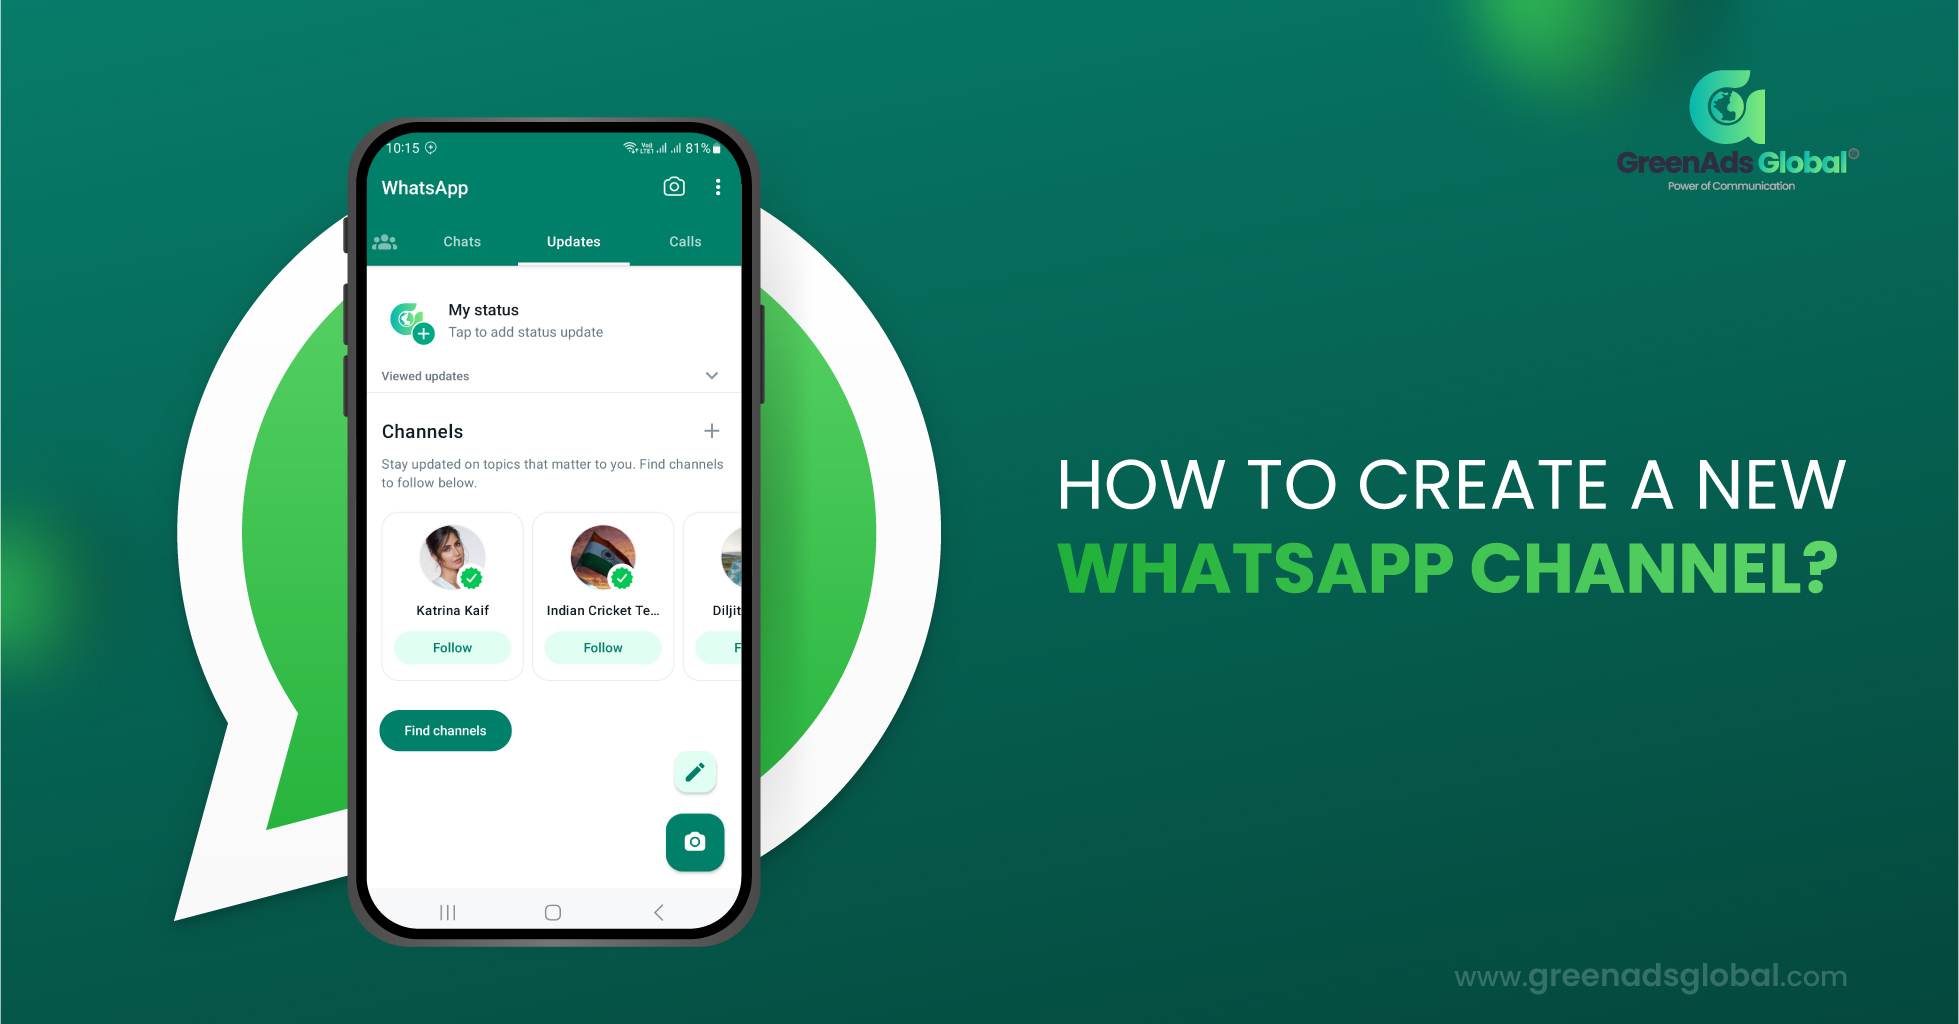 Creating a WhatsApp Channel: A Step-by-Step Guide